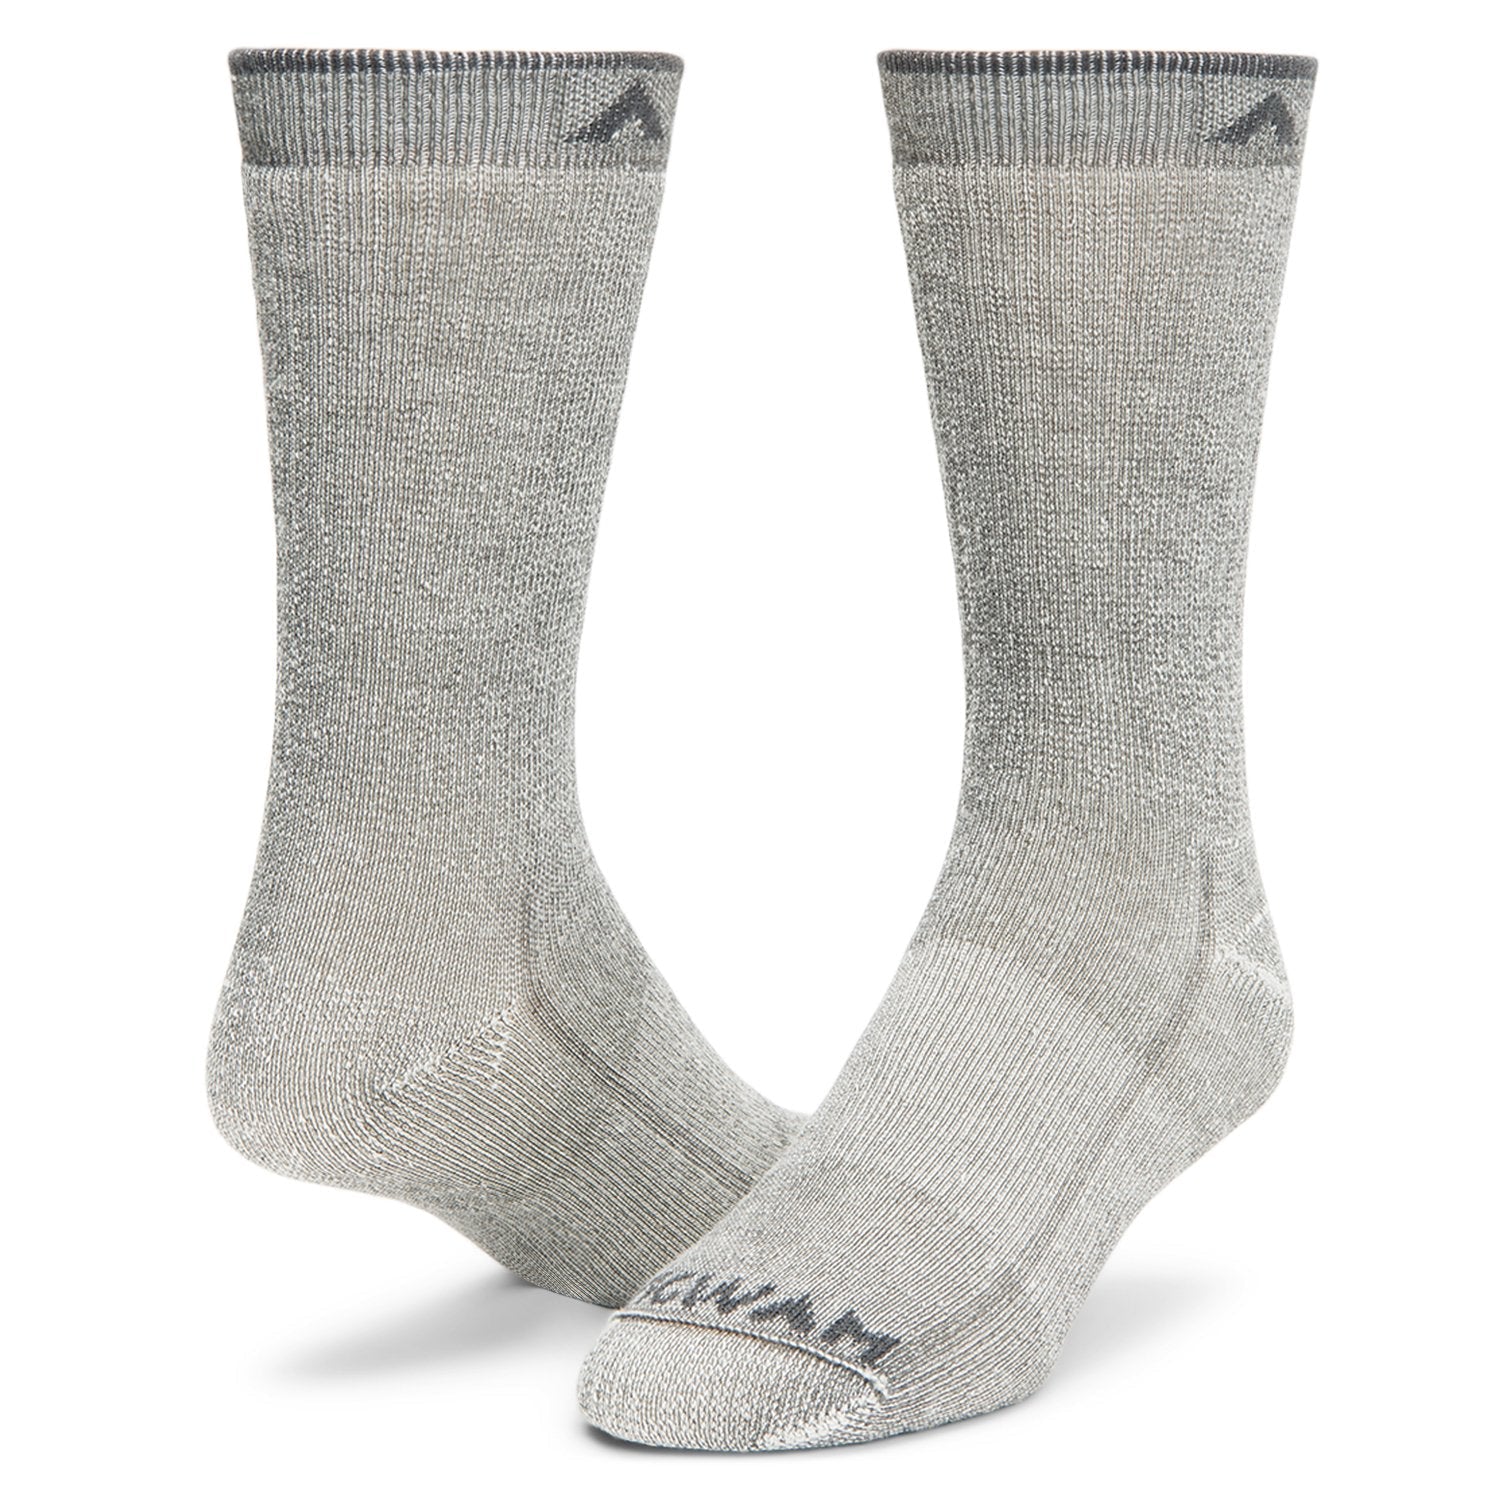 Merino Comfort Hiker 2-Pack - Assortment 3 full product perspective - made in The USA Wigwam Socks